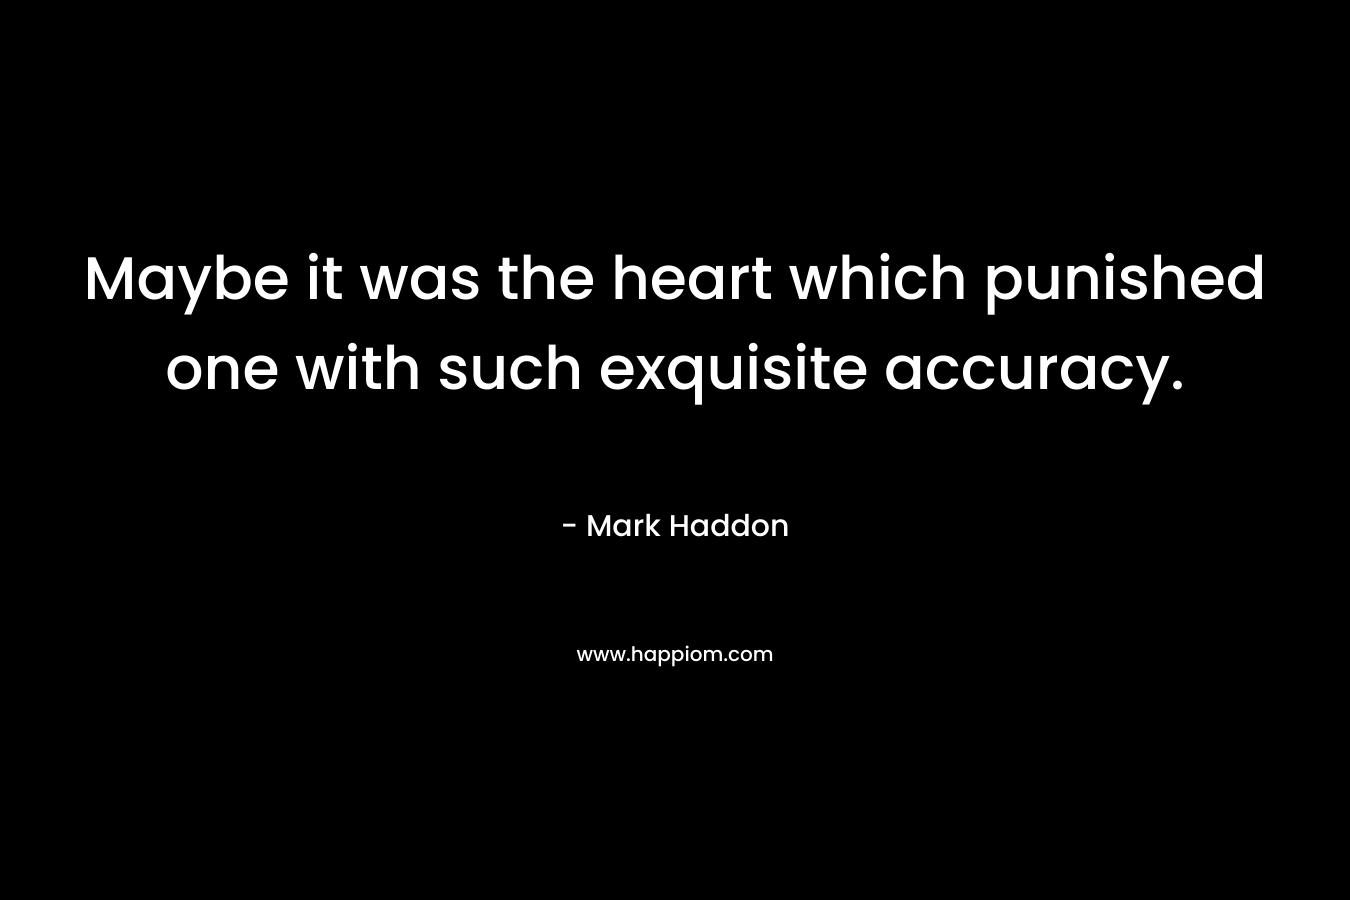 Maybe it was the heart which punished one with such exquisite accuracy. – Mark Haddon